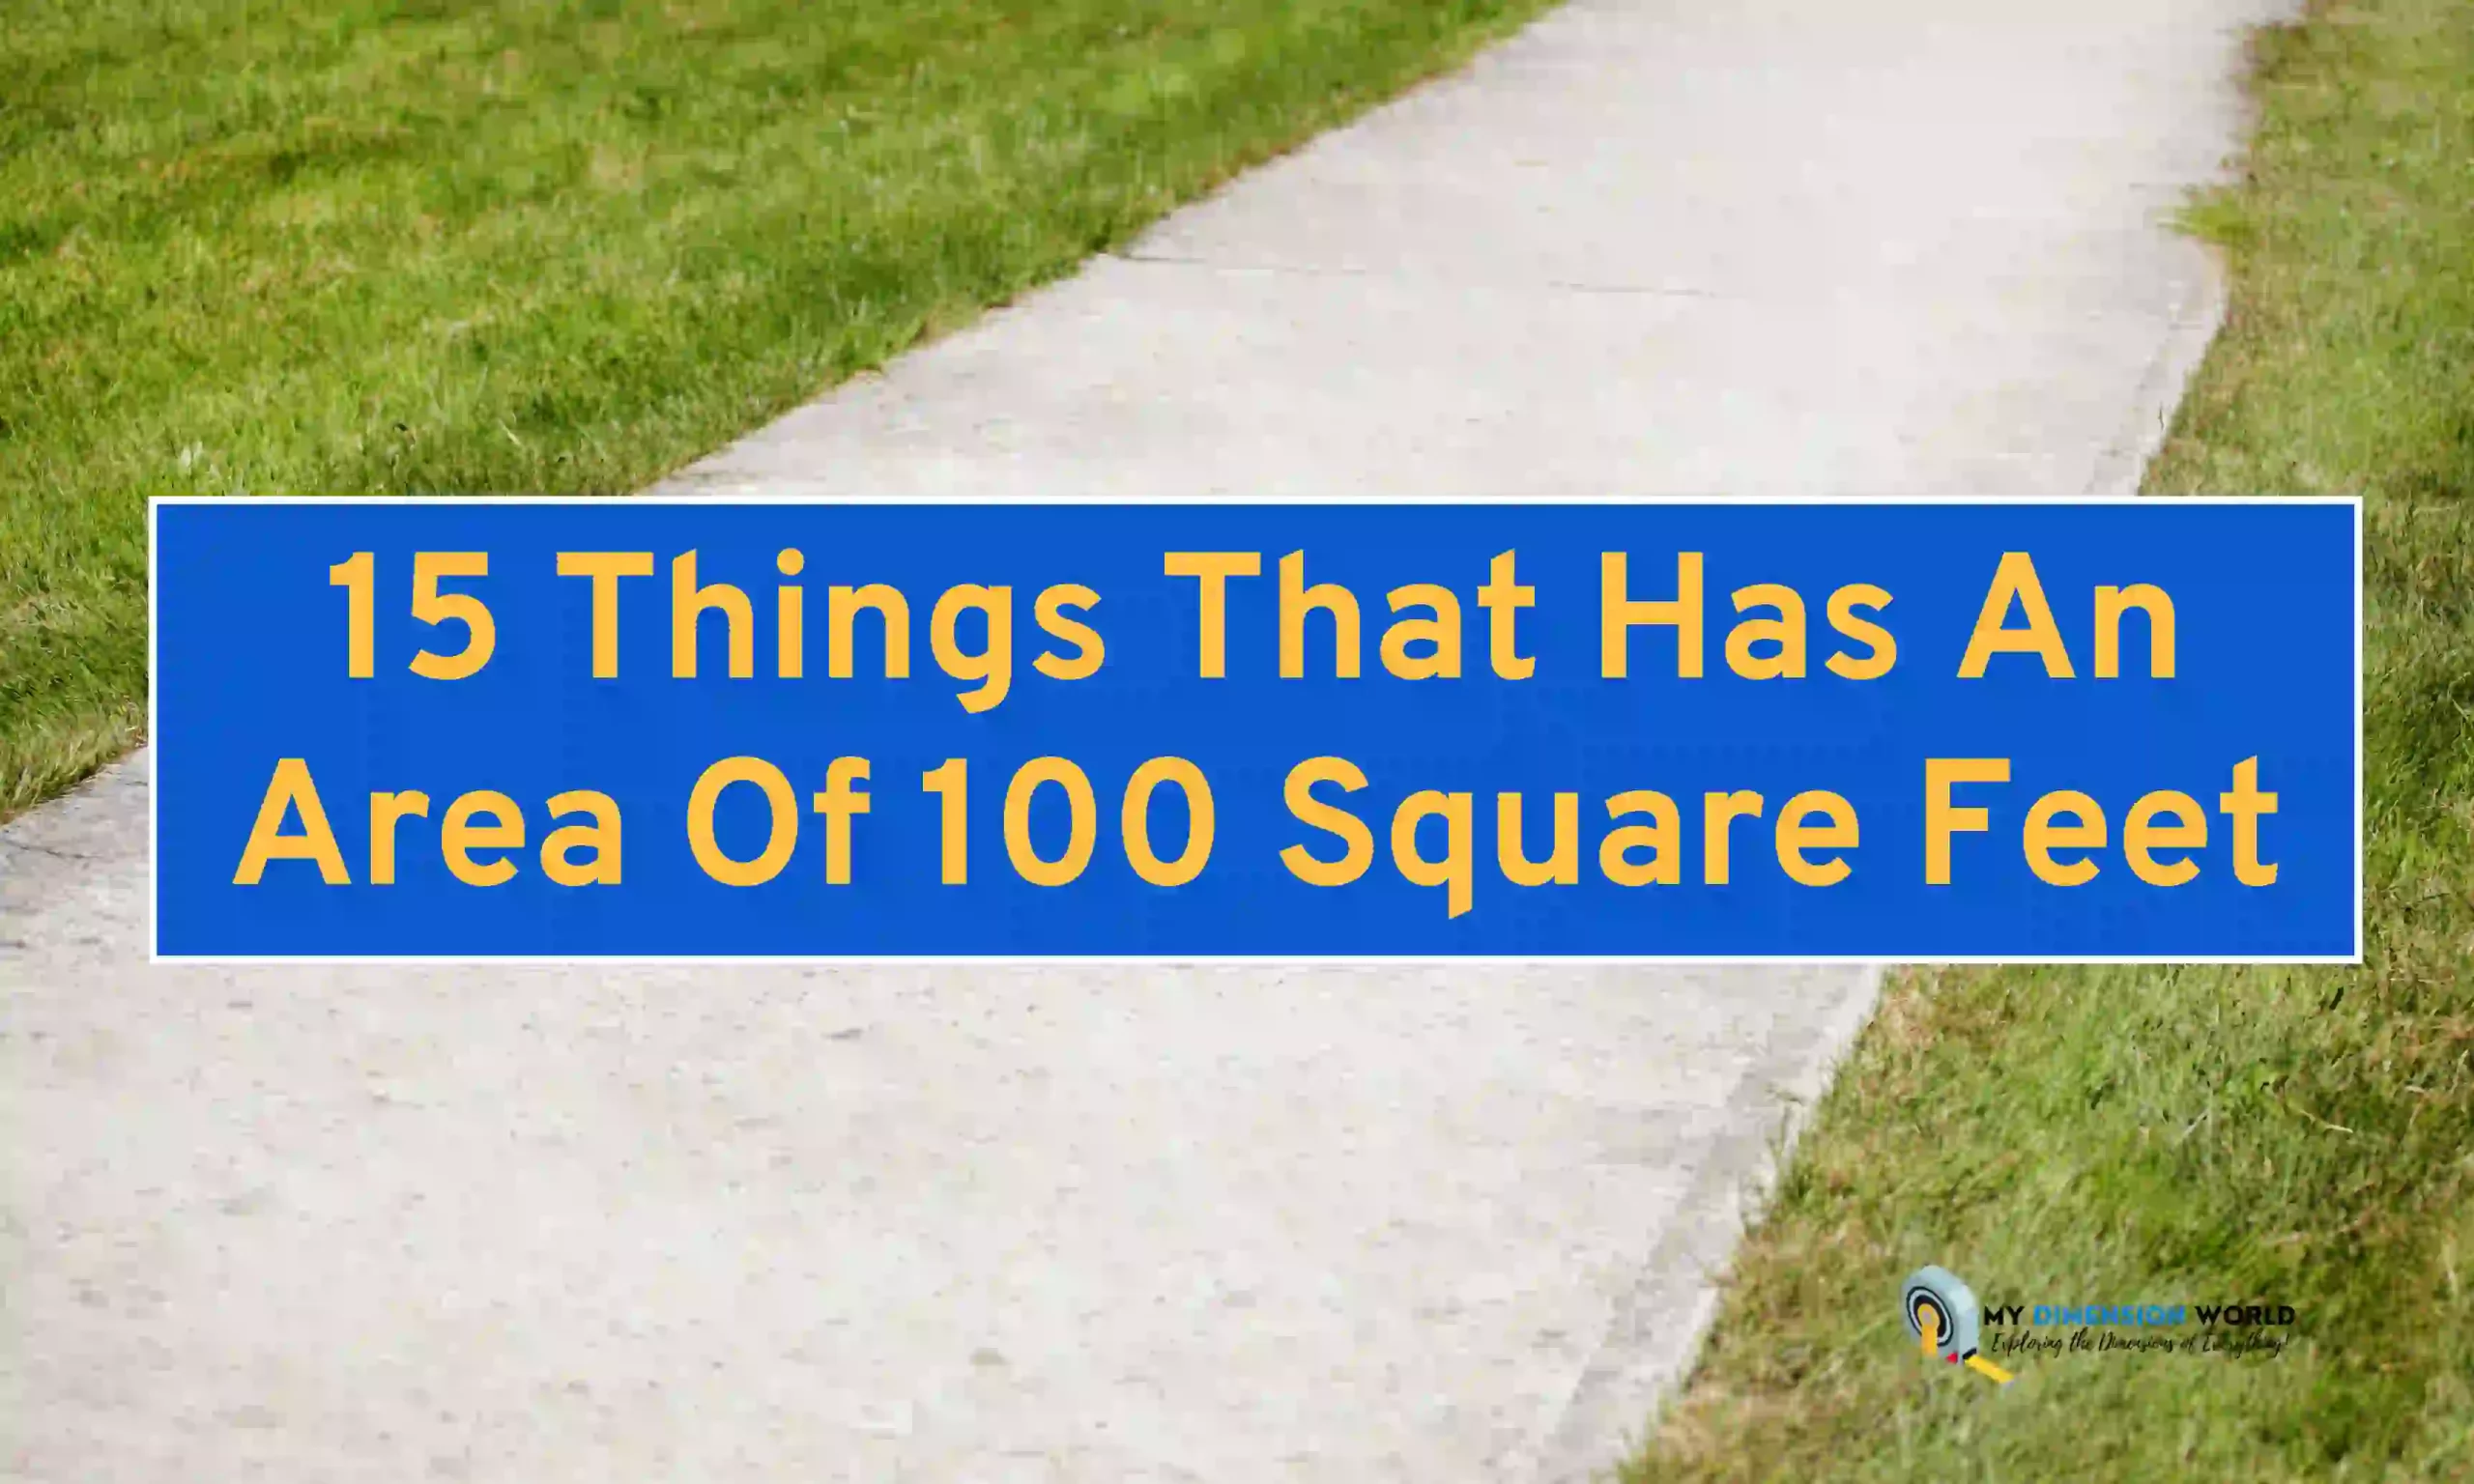 15 Things That Has An Area Of 100 Square Feet (ft2)